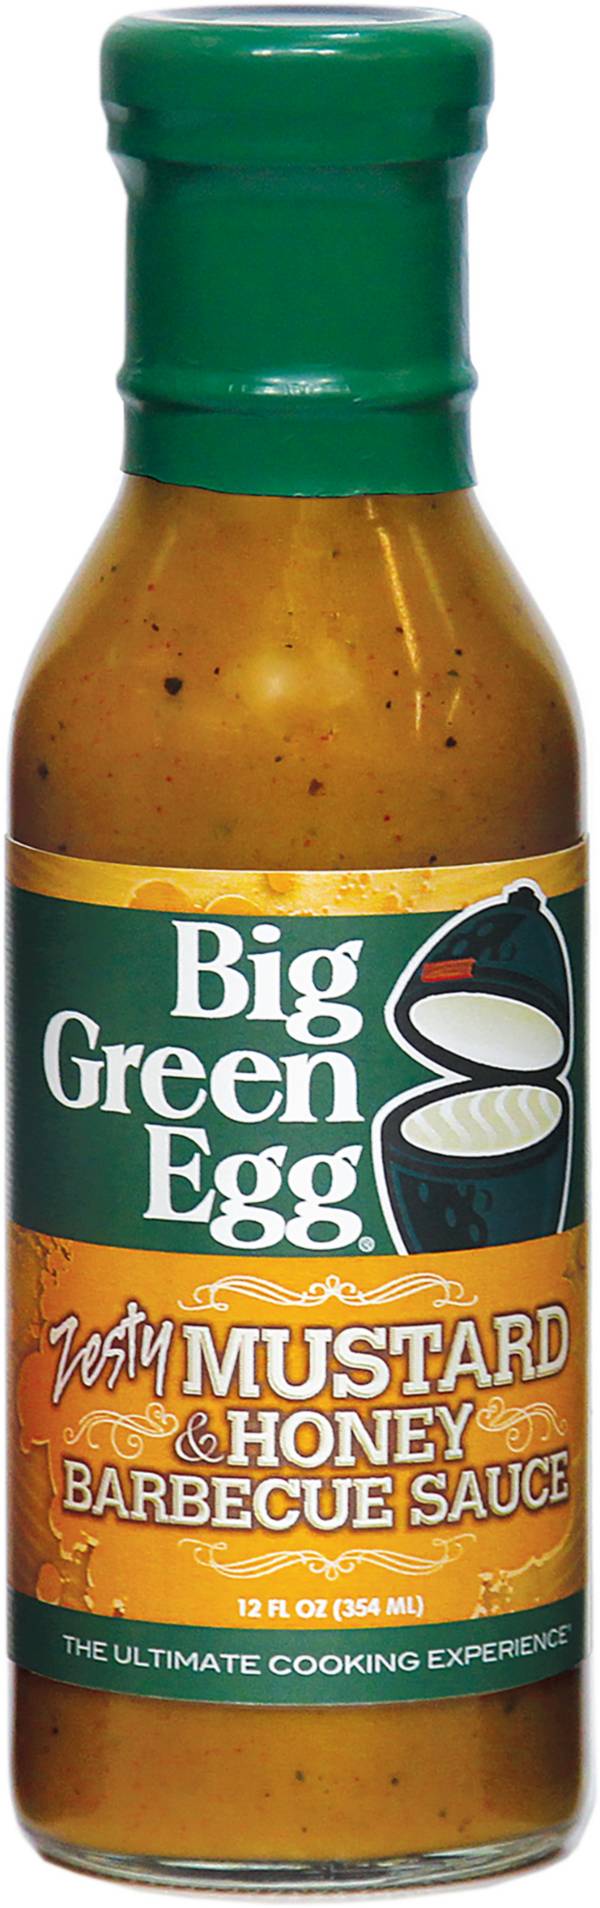 Big Green Egg Mustard and Honey Barbeque Sauce product image